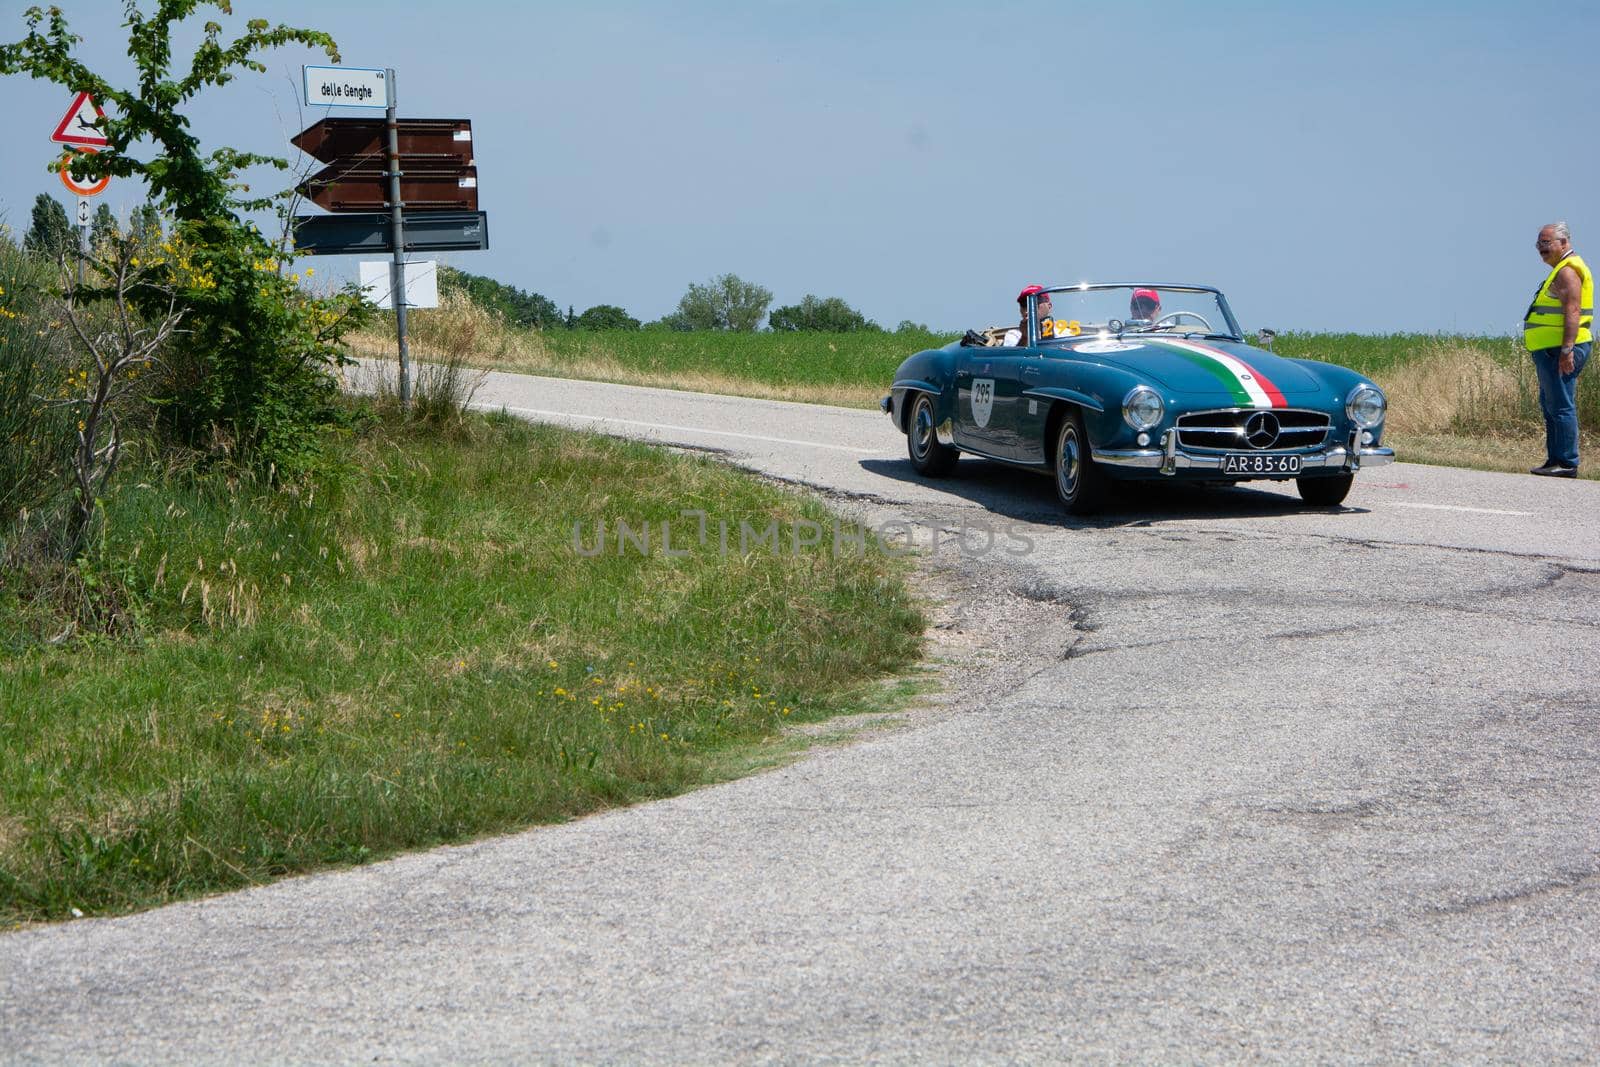 MERCEDES-BENZ 190 SL 1957 on an old racing car in rally Mille Miglia 2022 the famous italian historical race (1927-1957 by massimocampanari